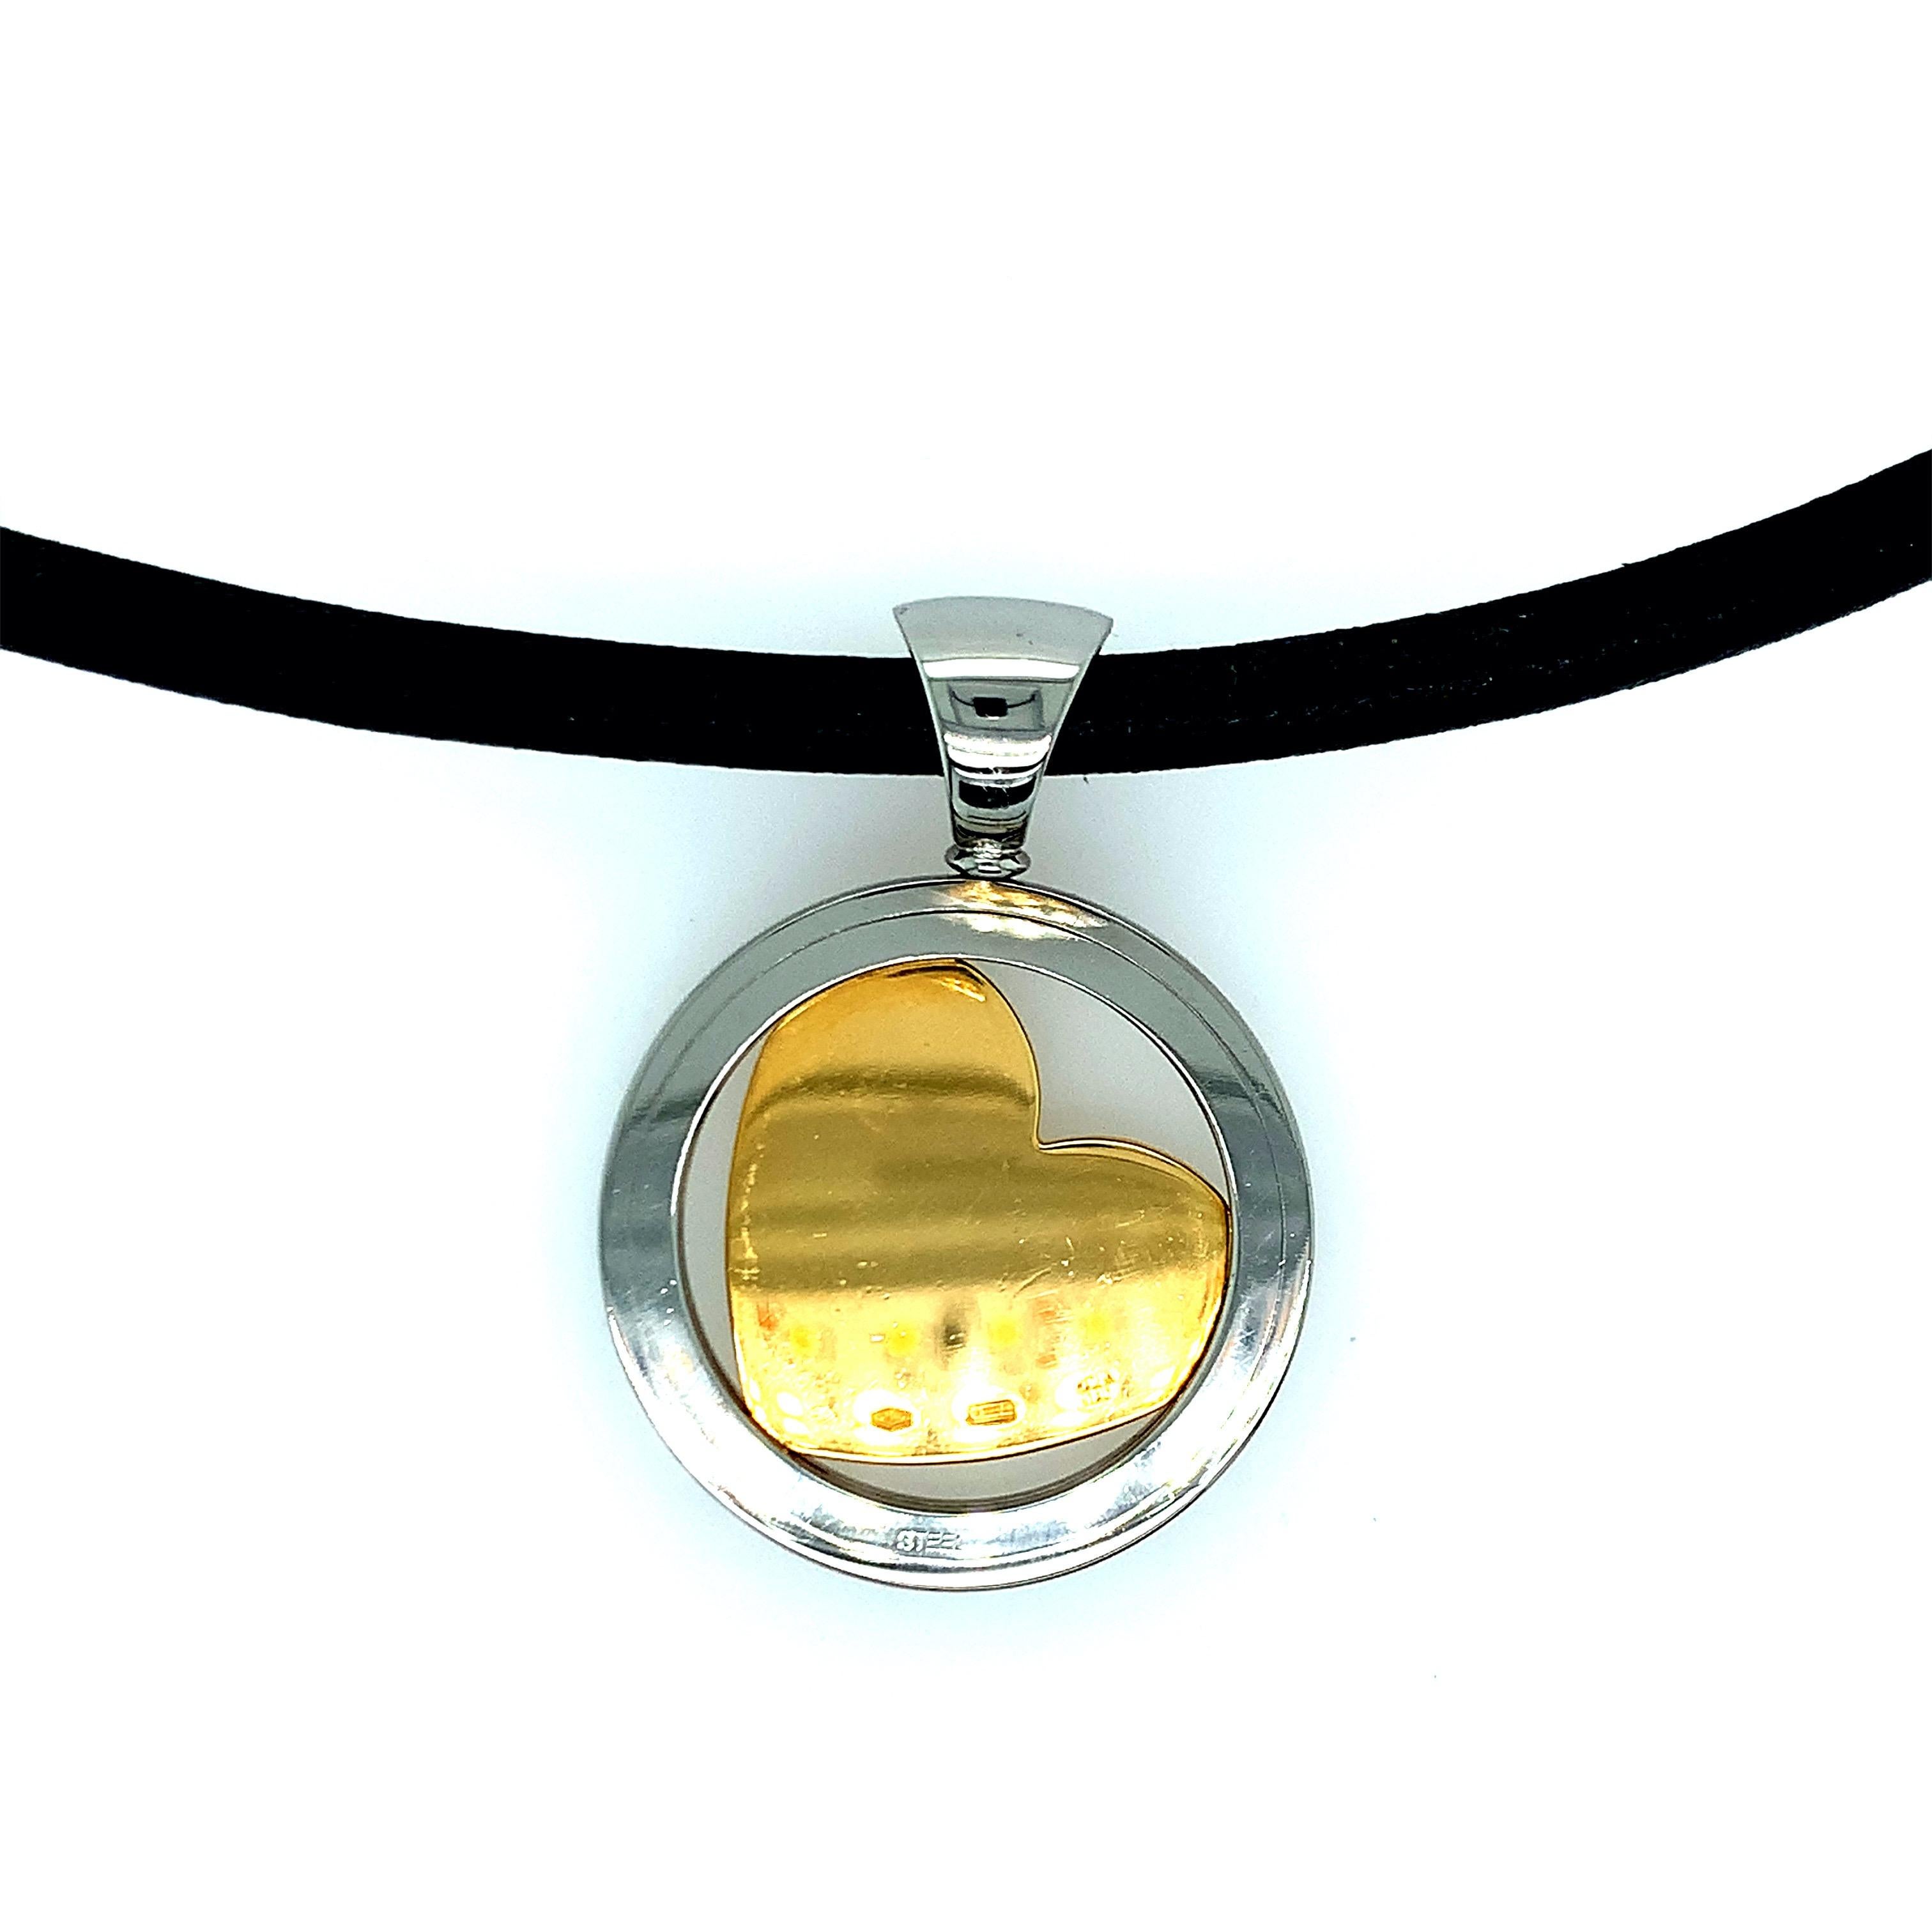 Created by Bvlgari, this necklace features a gold heart inside a circular steel. Diamonds in the shape of another heart is found within the gold heart. Total weight: 29.4 grams. Length of necklace: 17 inches. Pendant measurements: length 1.75 inch,